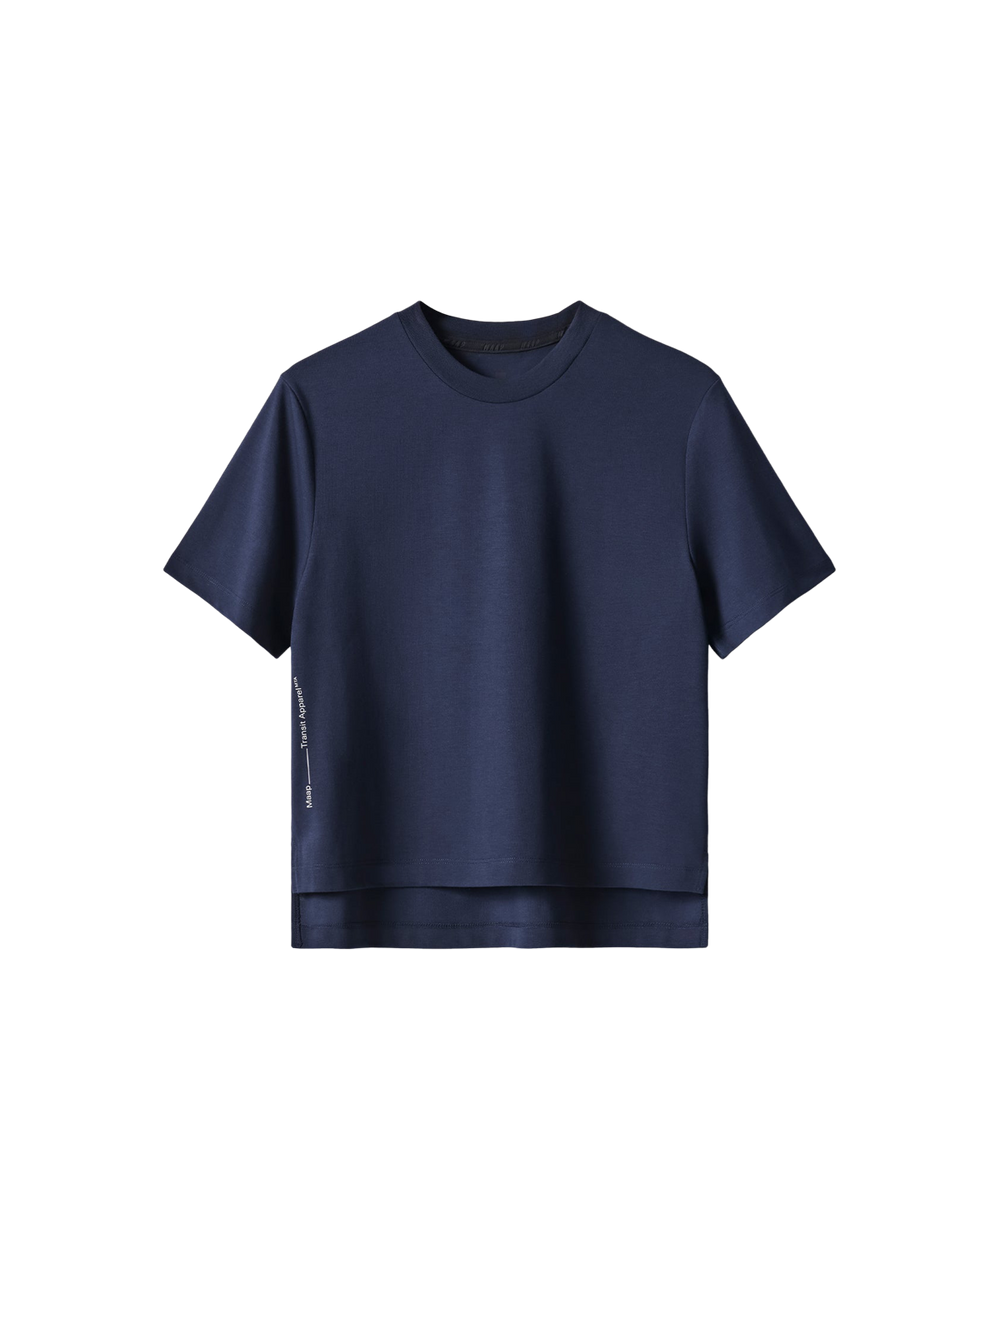 Product Image for Women's Transit Tee